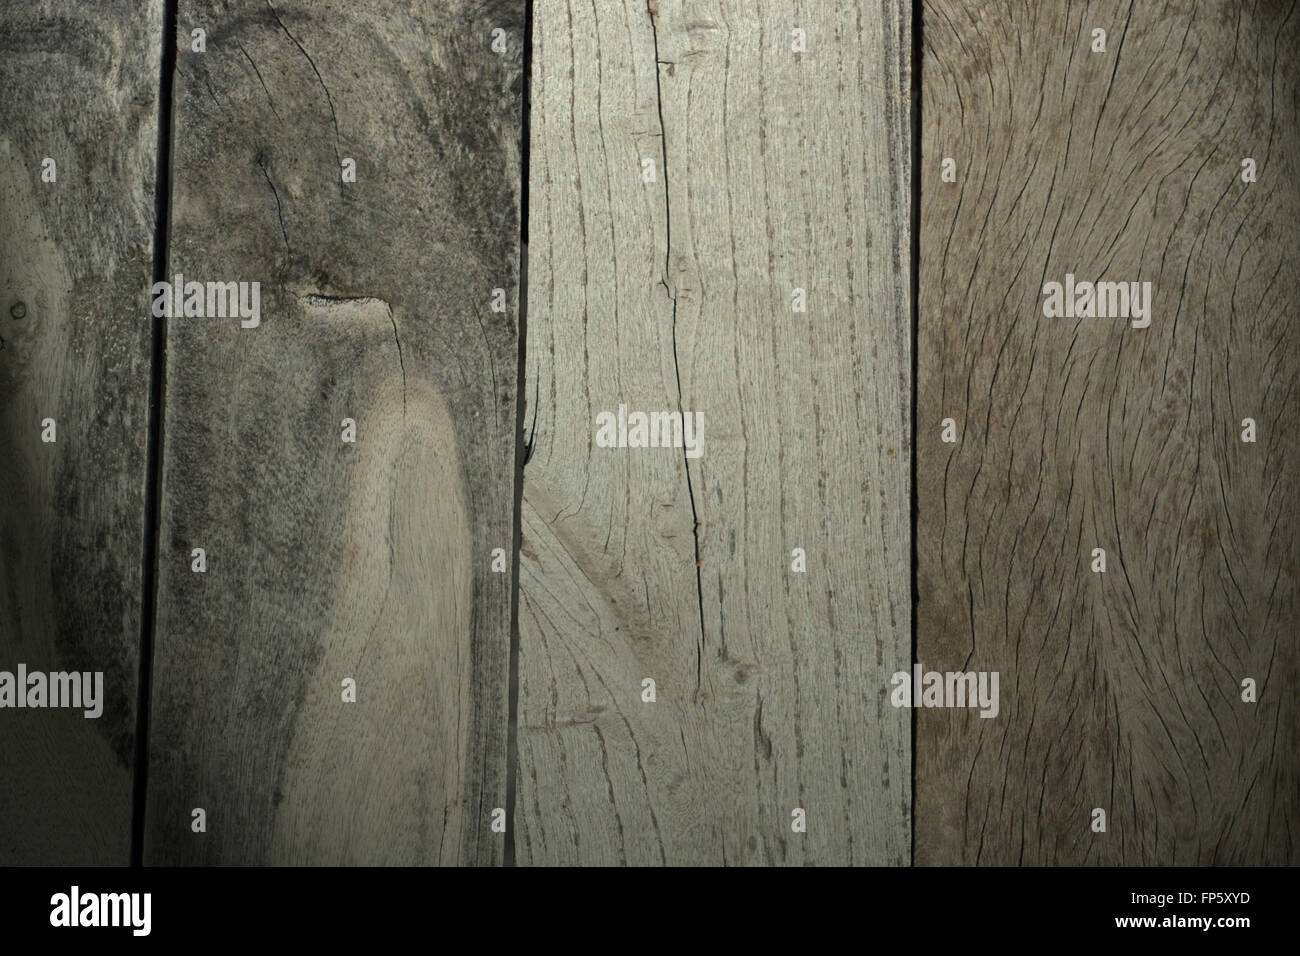 Rustic weathered barn wood background with knots and nail holes. Stock Photo